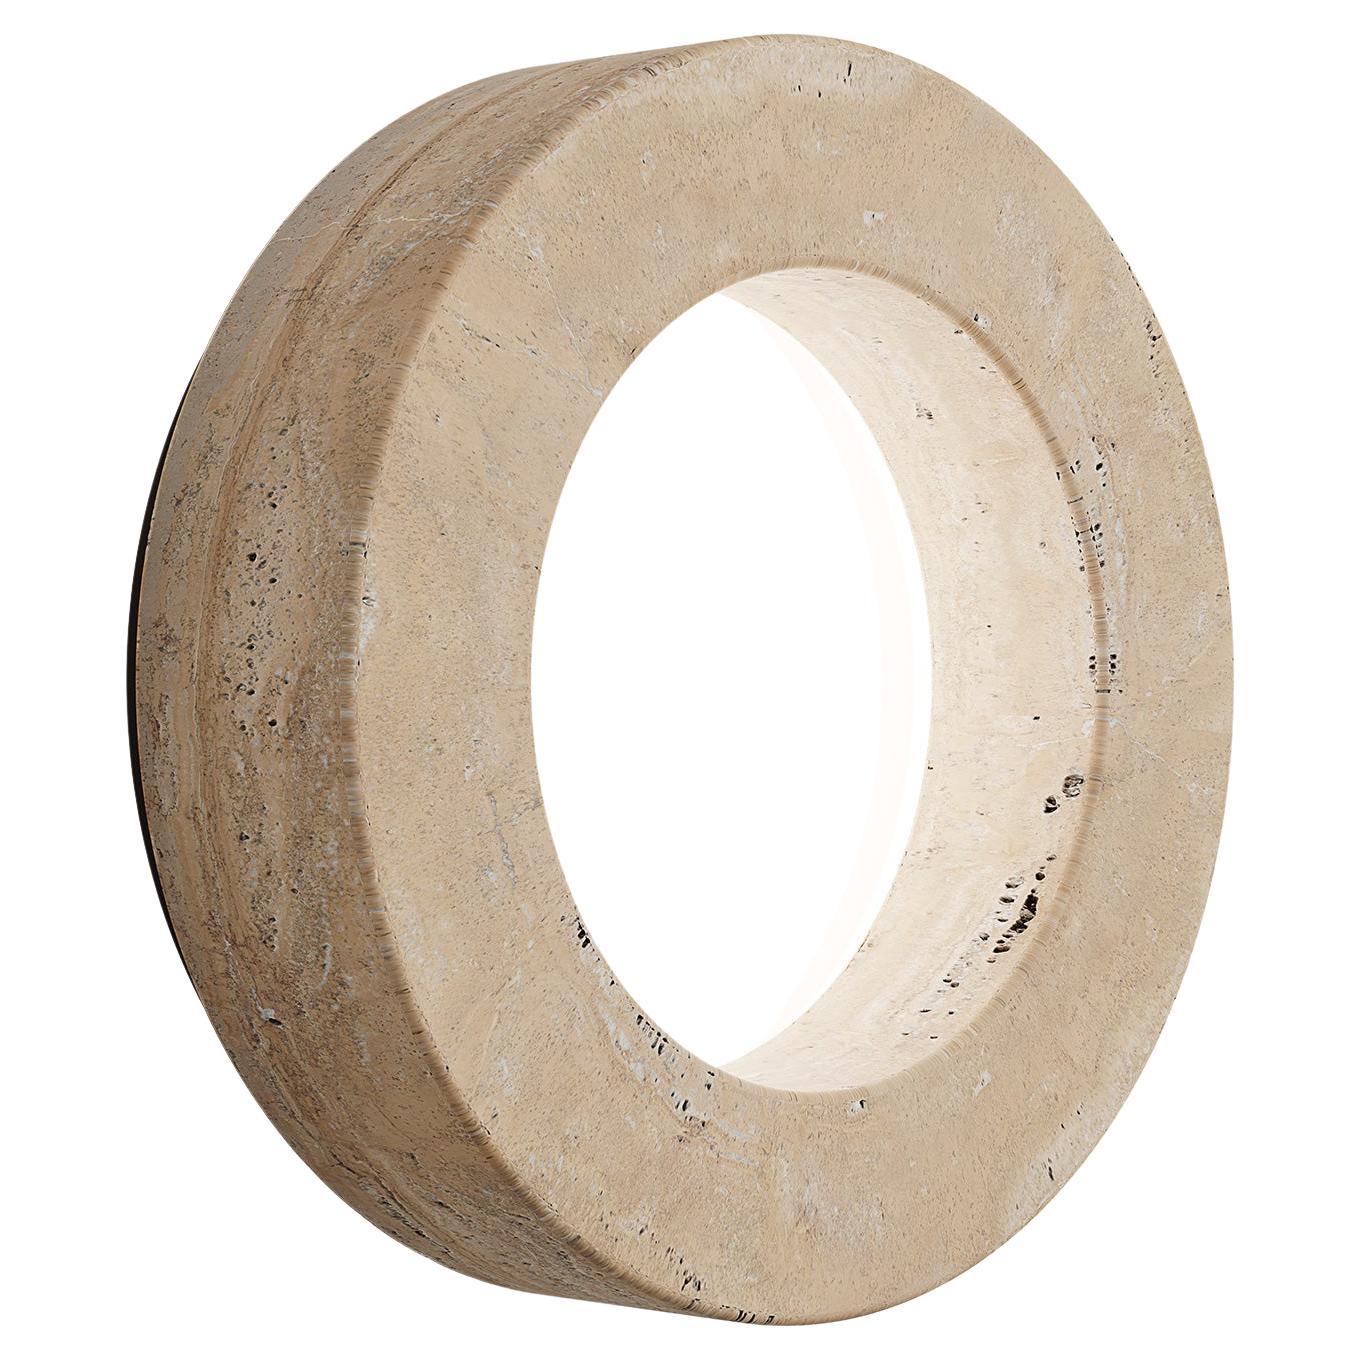 Organic Modern Round Wall Lamp, Beje Travertine Marble Circular Shape Sconce For Sale